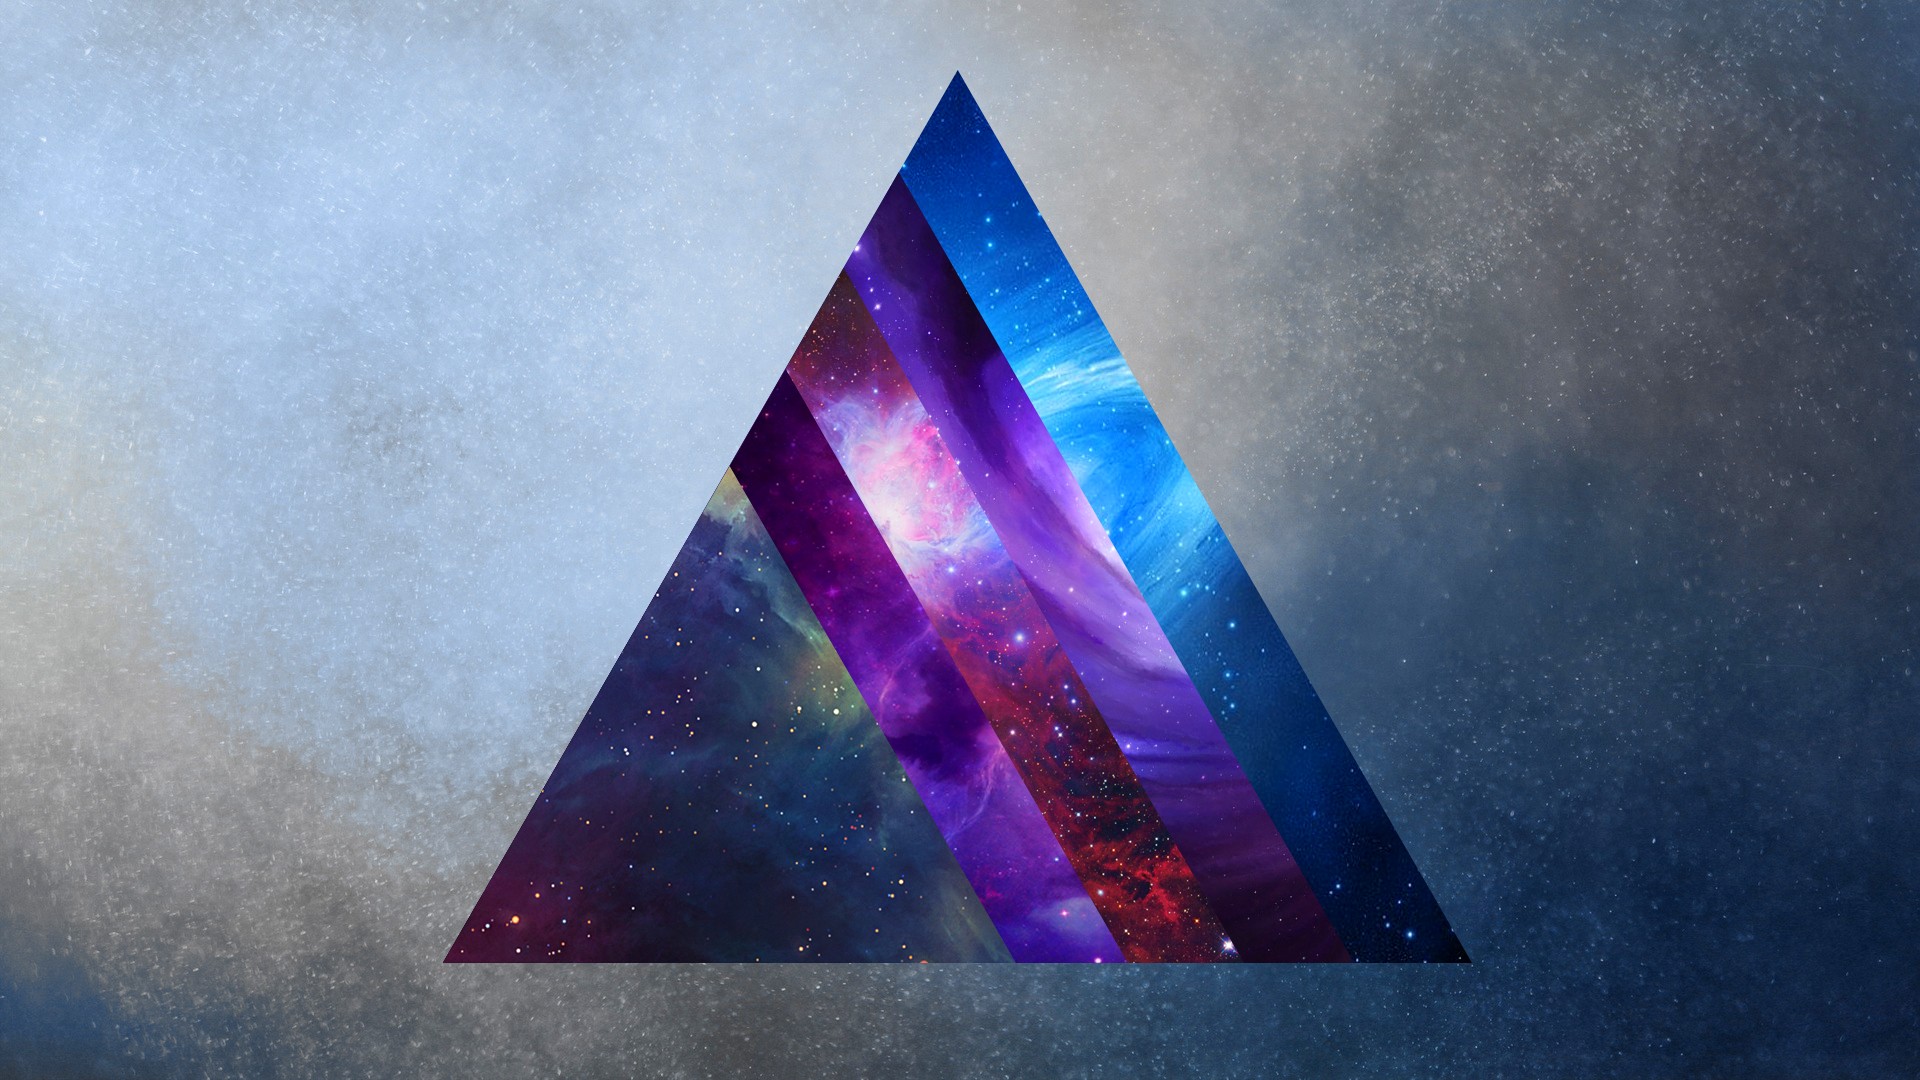 Space Prism Triangle 1920x1080